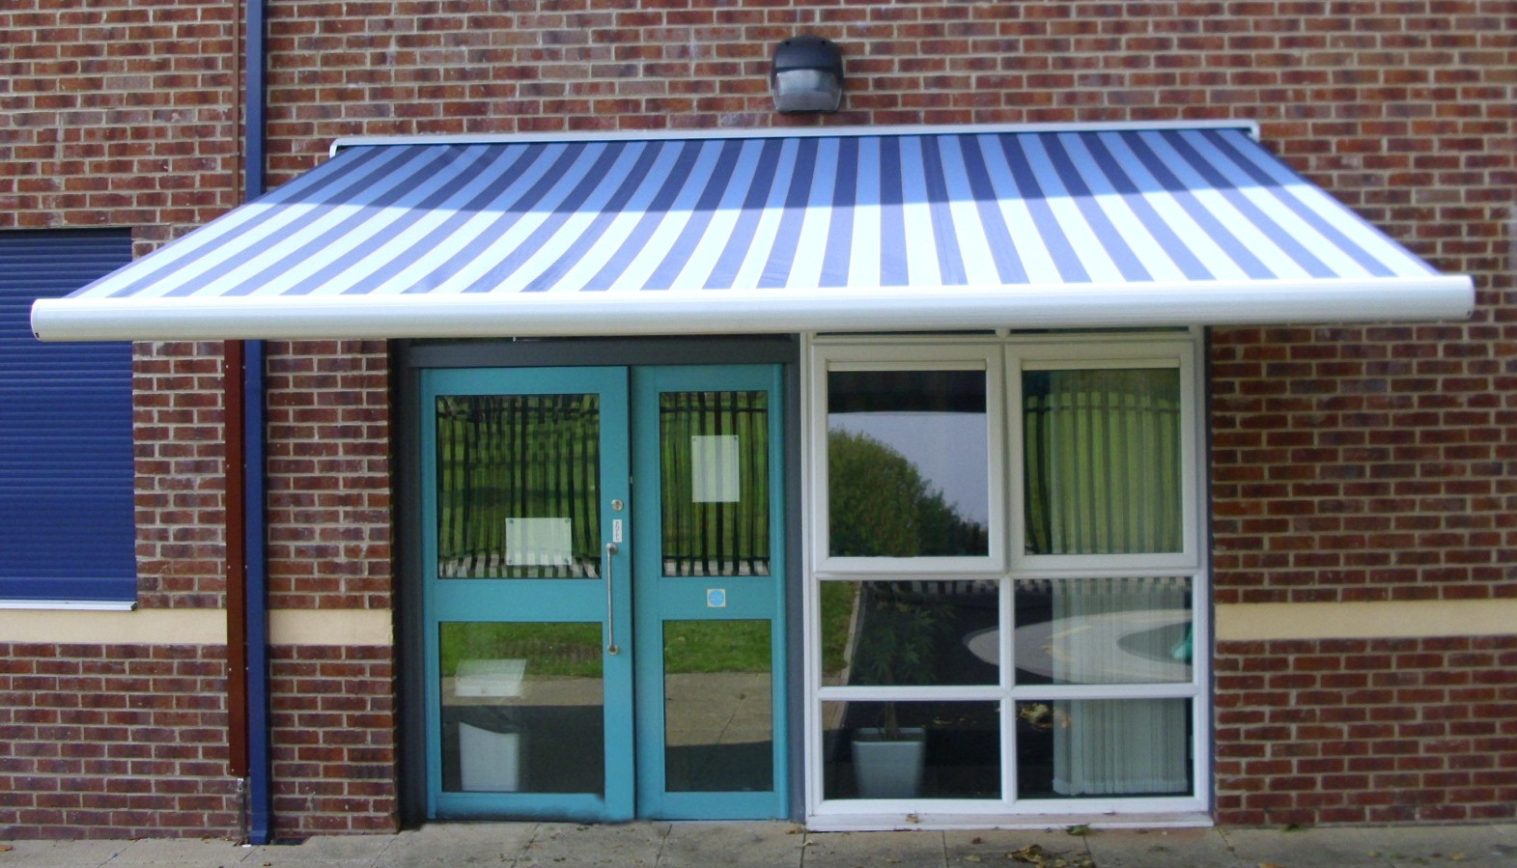 Central Children’s Centre – Awning